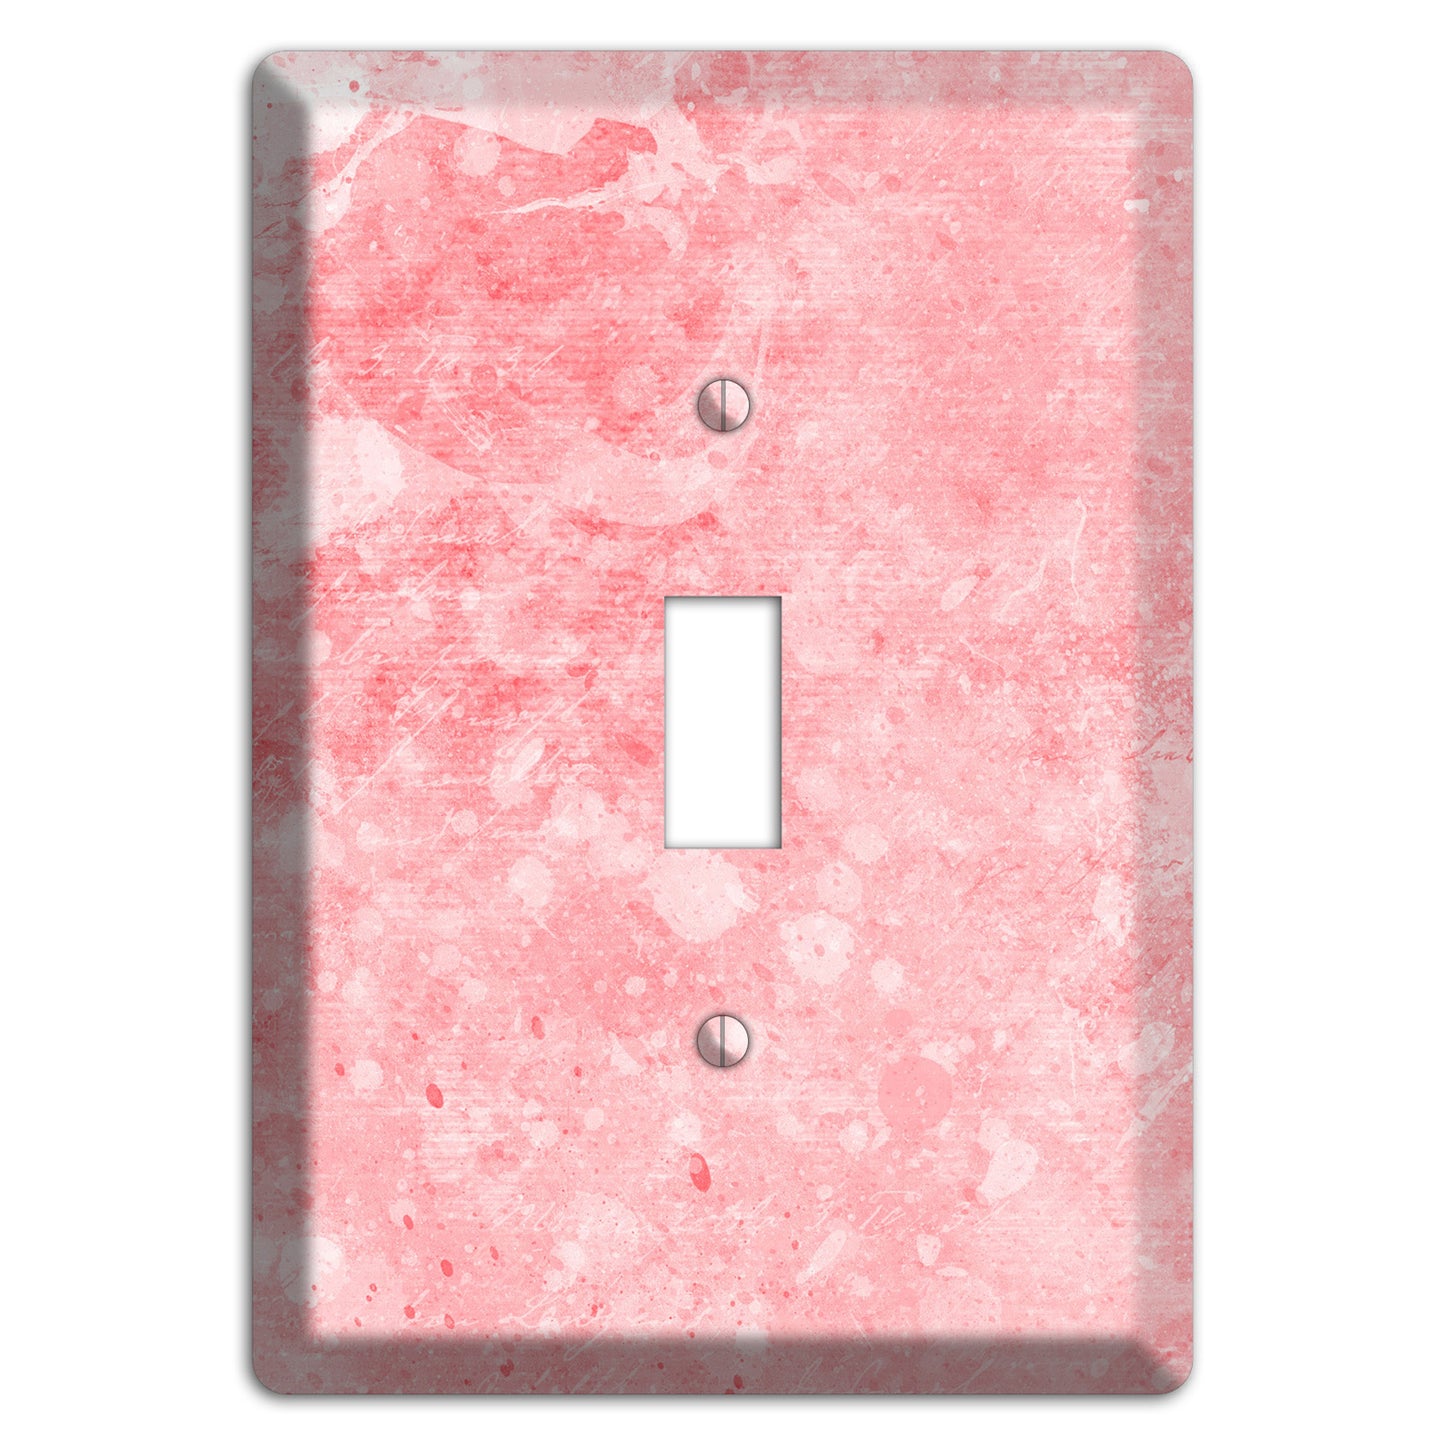 Rose Fog Soft Coral Cover Plates